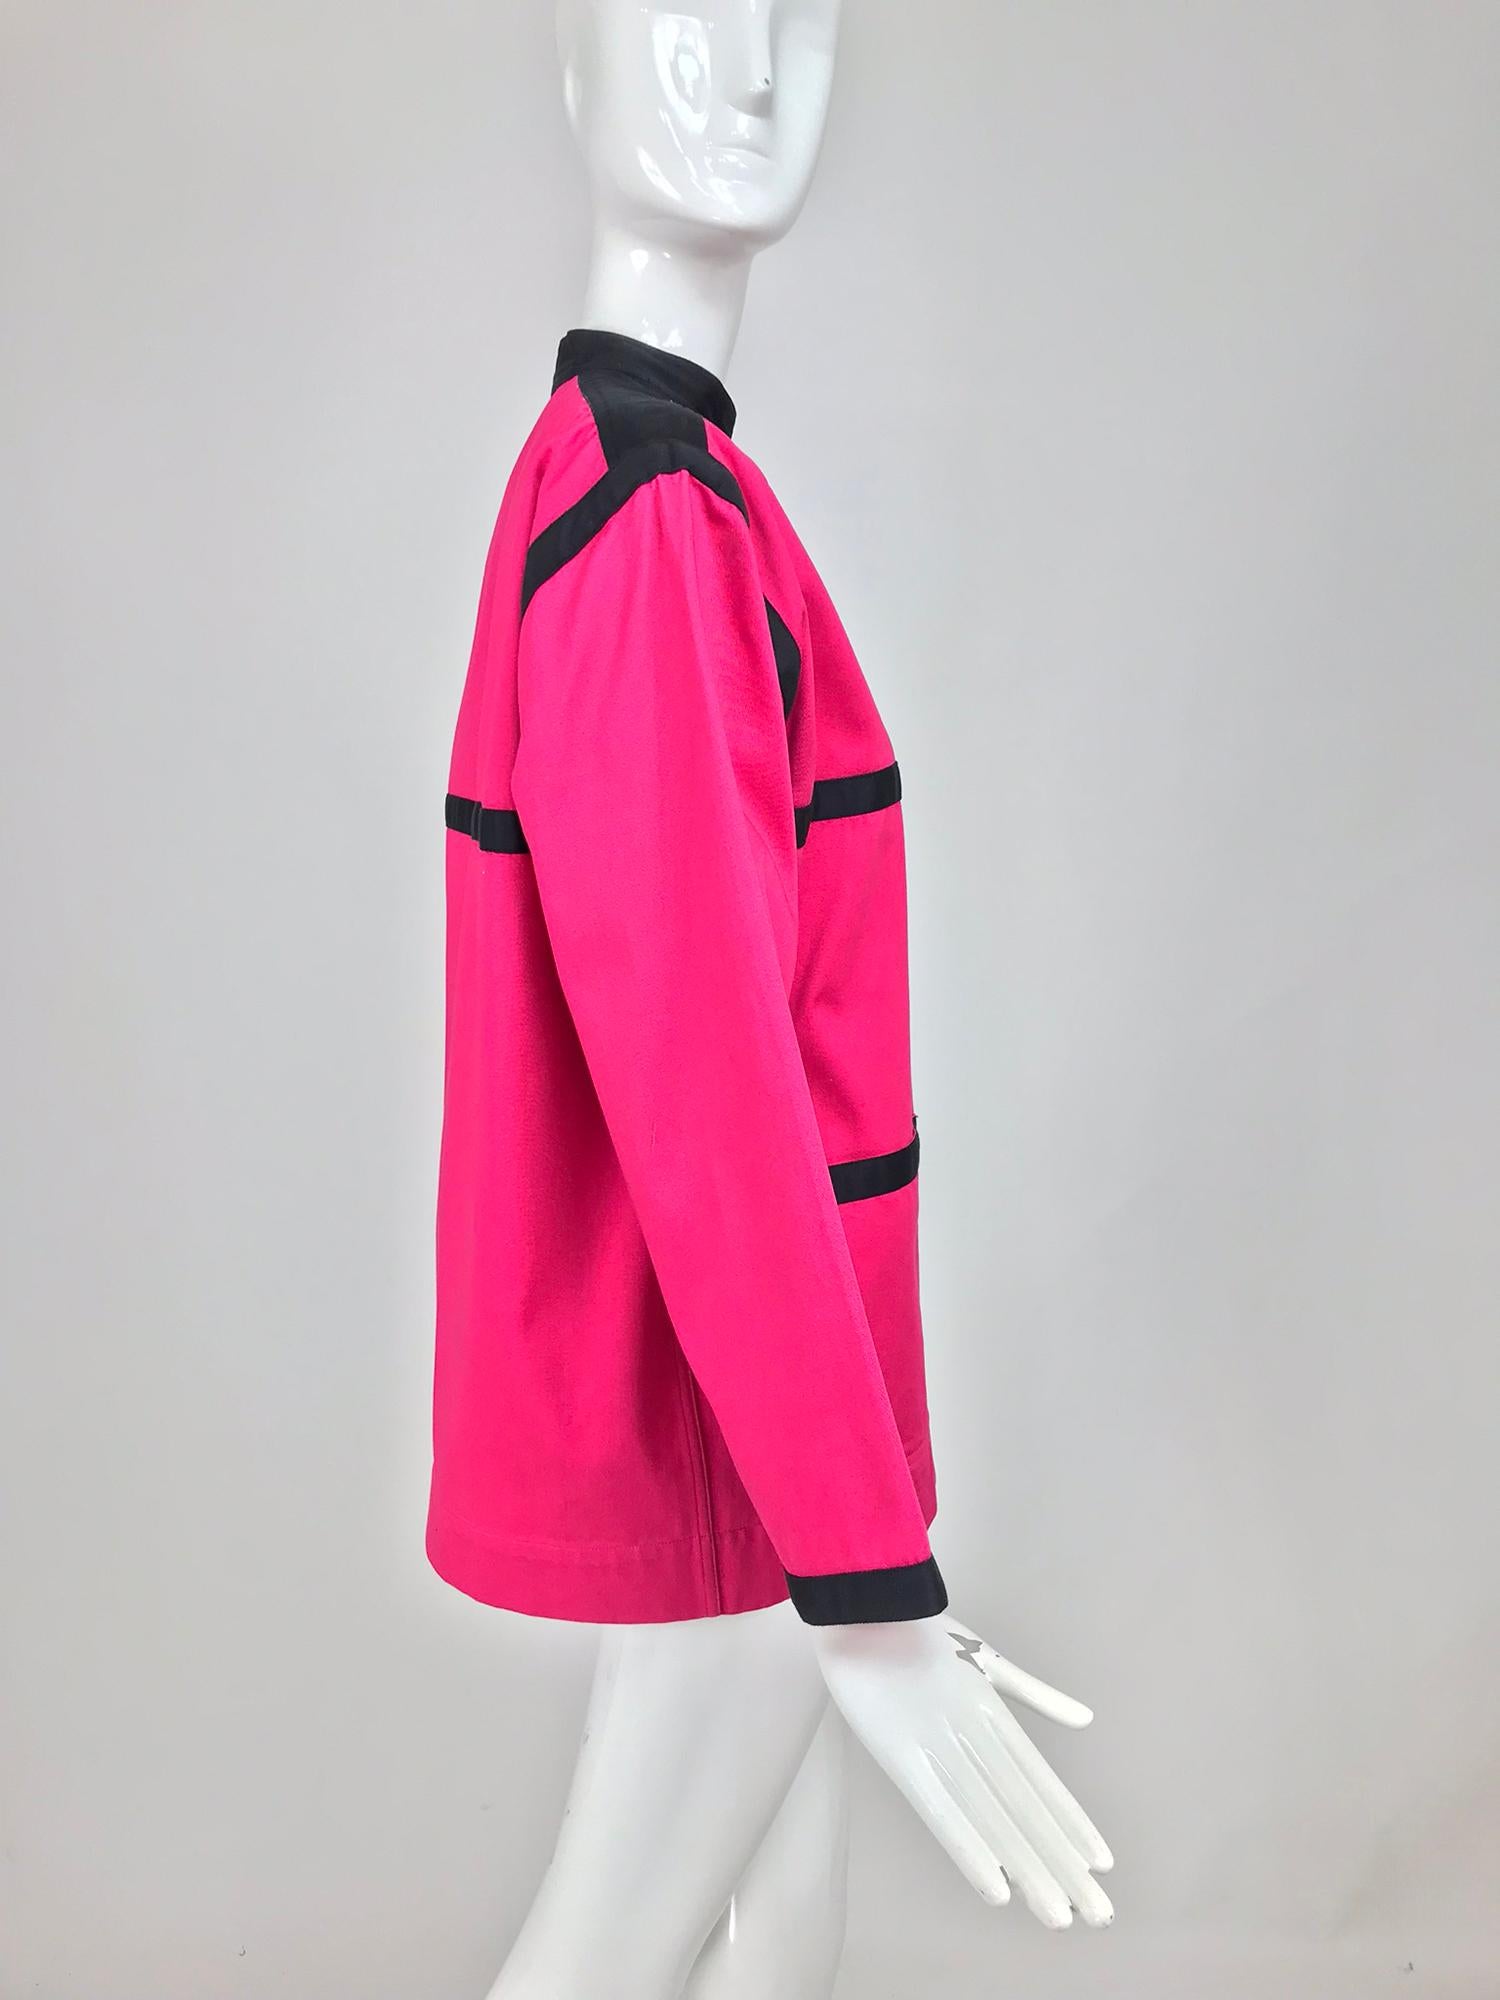 Yves Saint Laurent Hot Pink Colour Block Jacket 1970s In Good Condition For Sale In West Palm Beach, FL